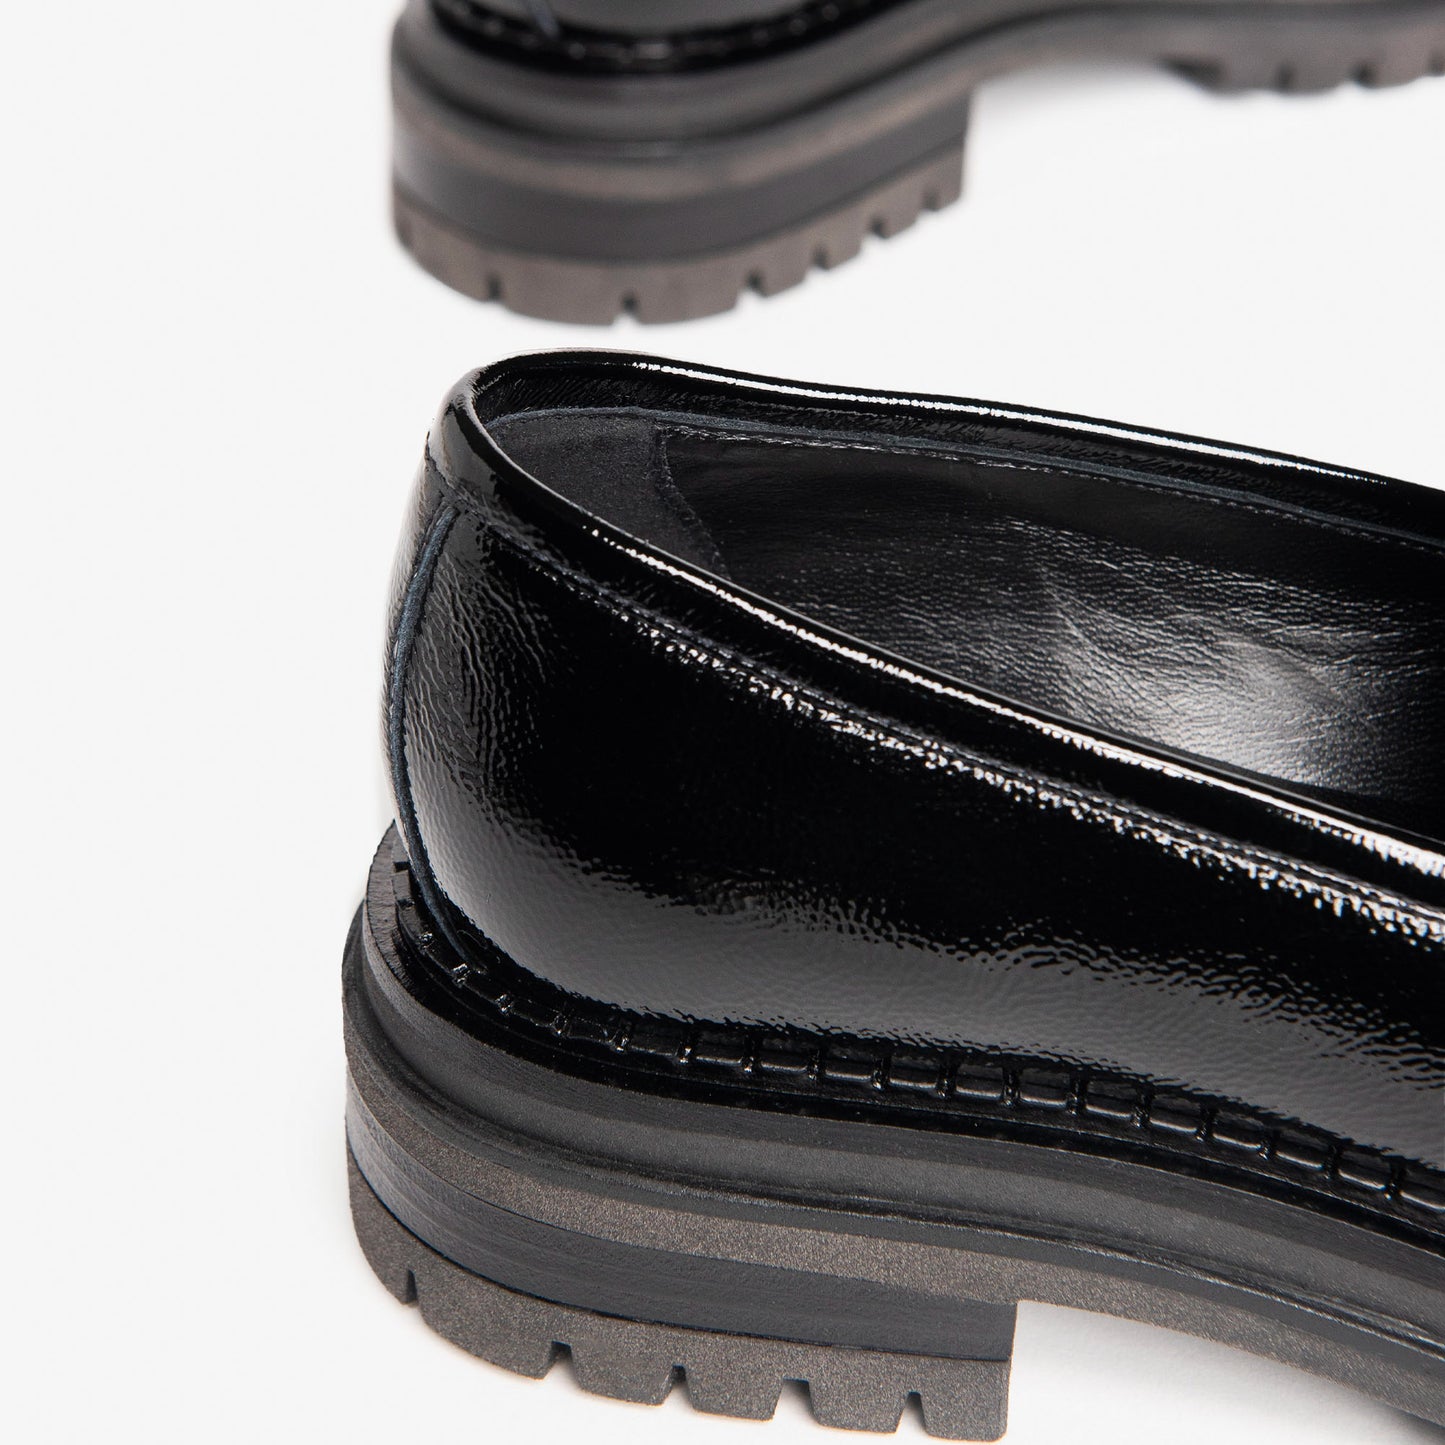 Black Patent Leather Loafer With Buckle